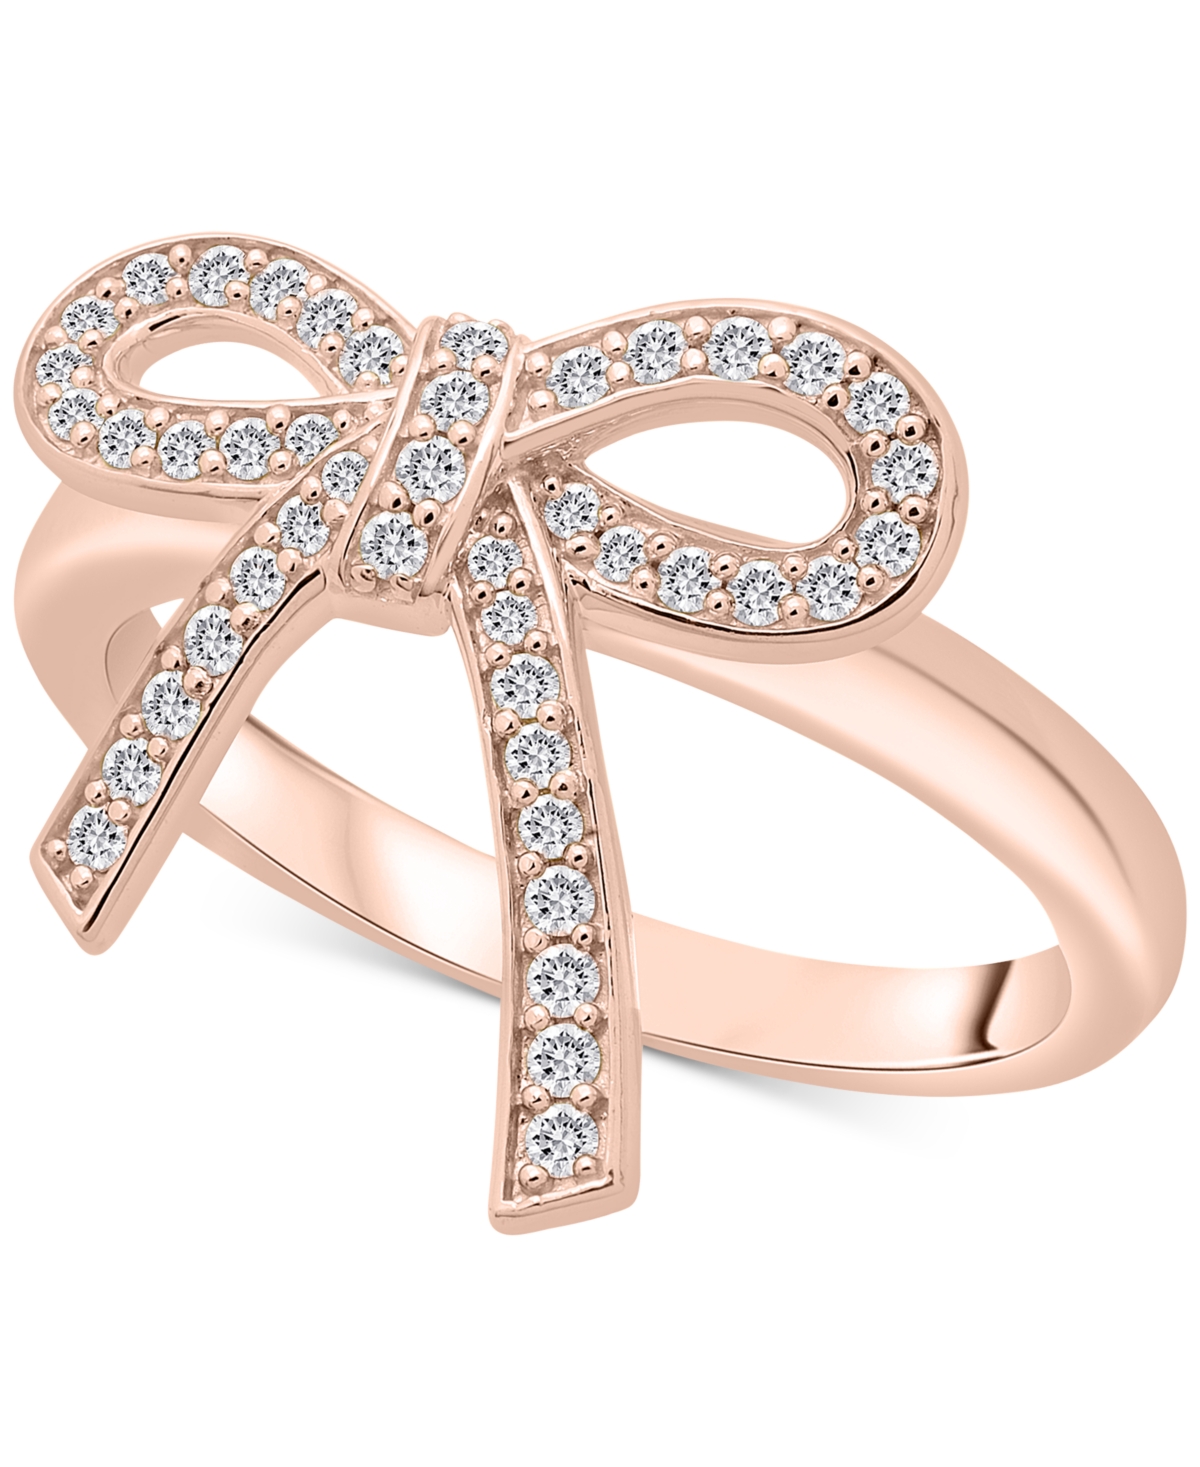 Diamond Bow Ring (1/4 ct. t.w.) in 14k Yellow or Rose Gold, Created for Macy's - Rose Gold